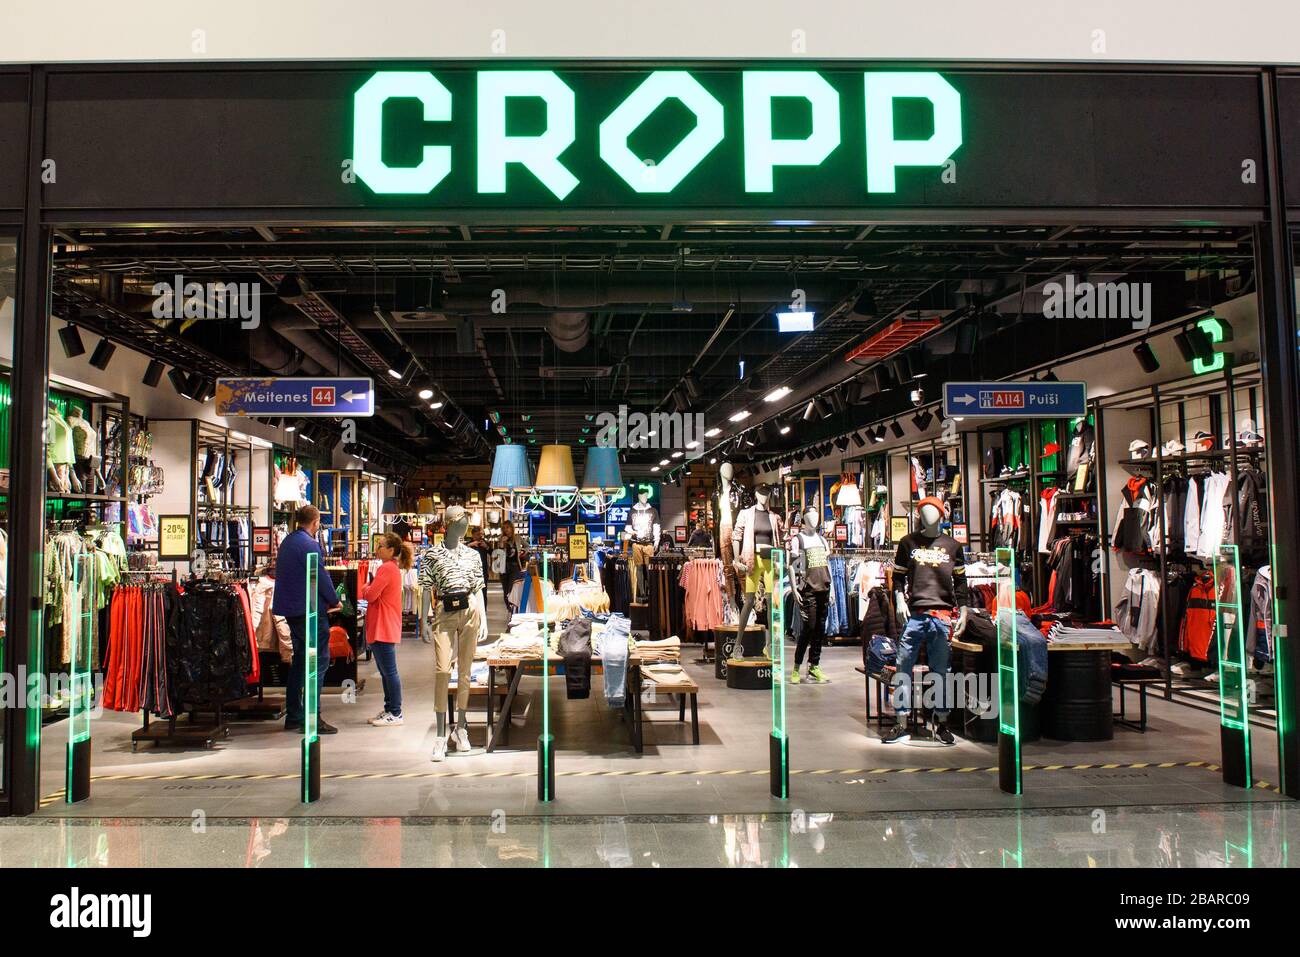 Cropp Company Logo High Resolution Stock Photography and Images - Alamy